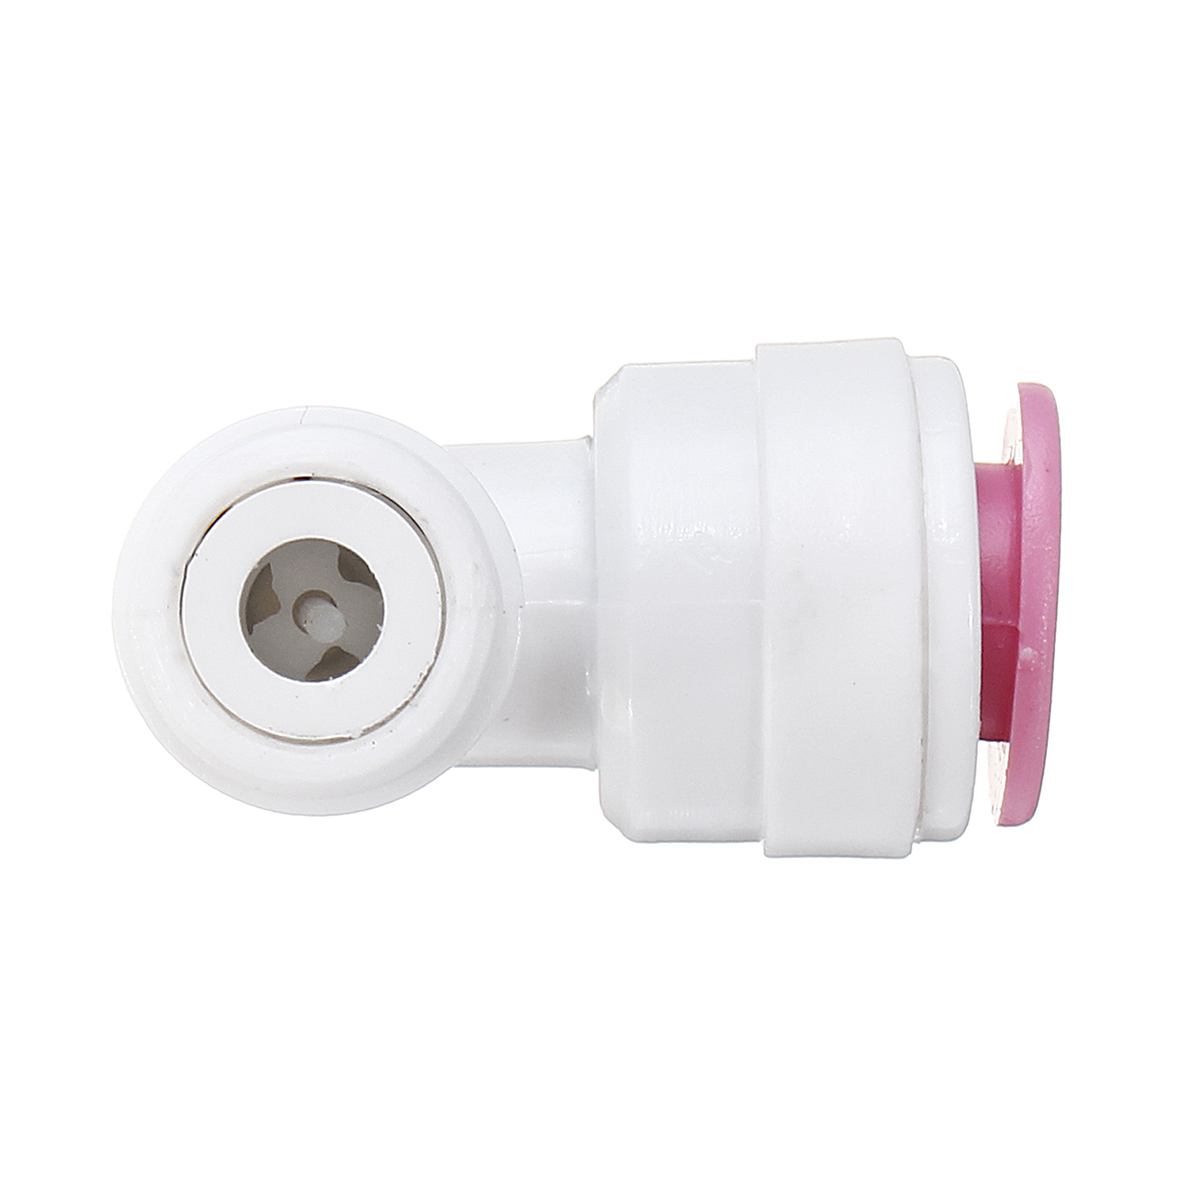 14-18-Inch-RO-Grade-Water-Pipes-Fittings-Quick-Connect-Push-In-to-Connect-Water-Pipe-1378099-6